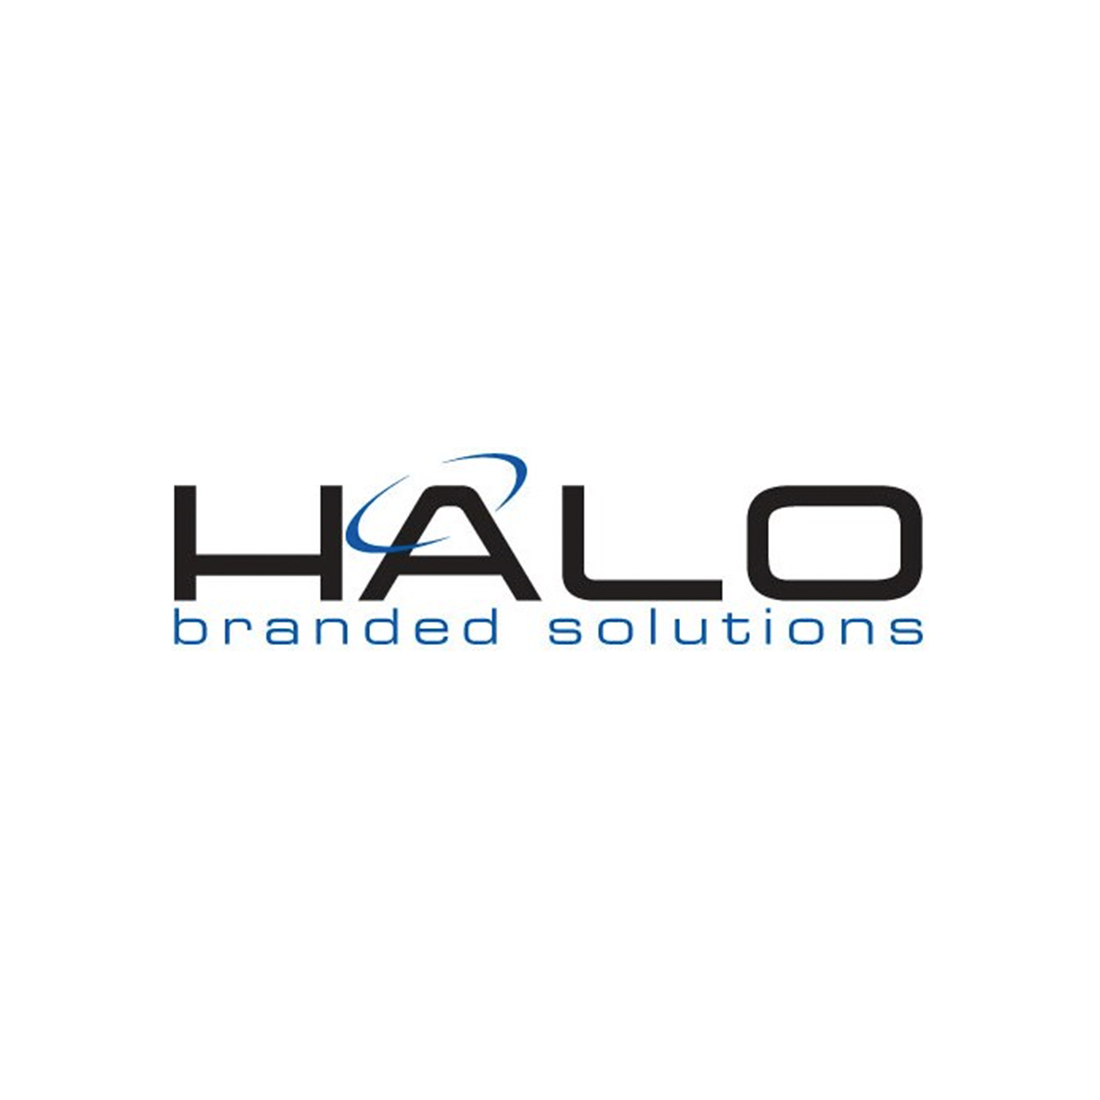 Halo Branded Solutions Credit Card Charge Explained